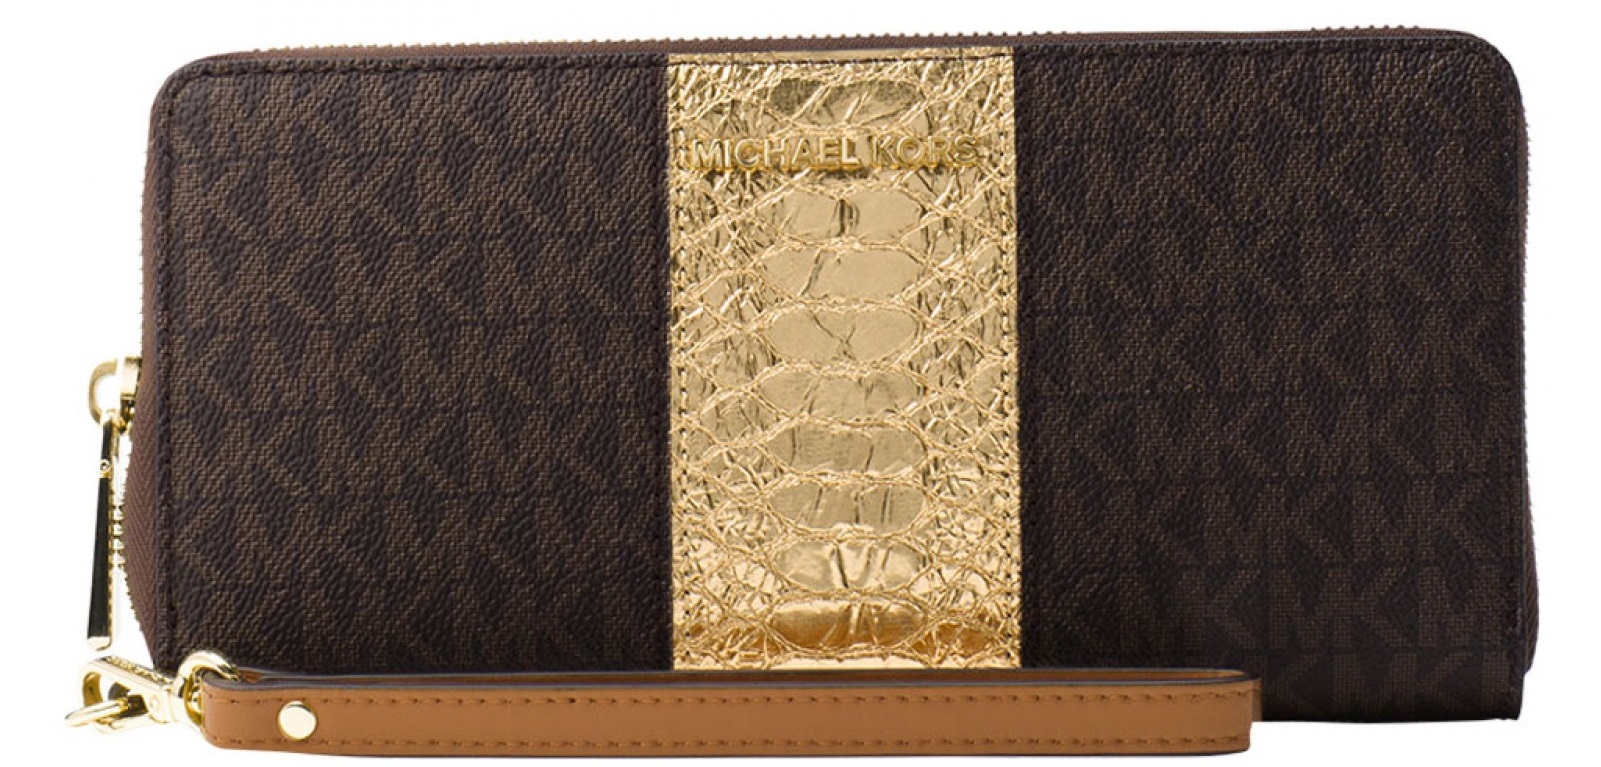 michael kors wallet brown and gold